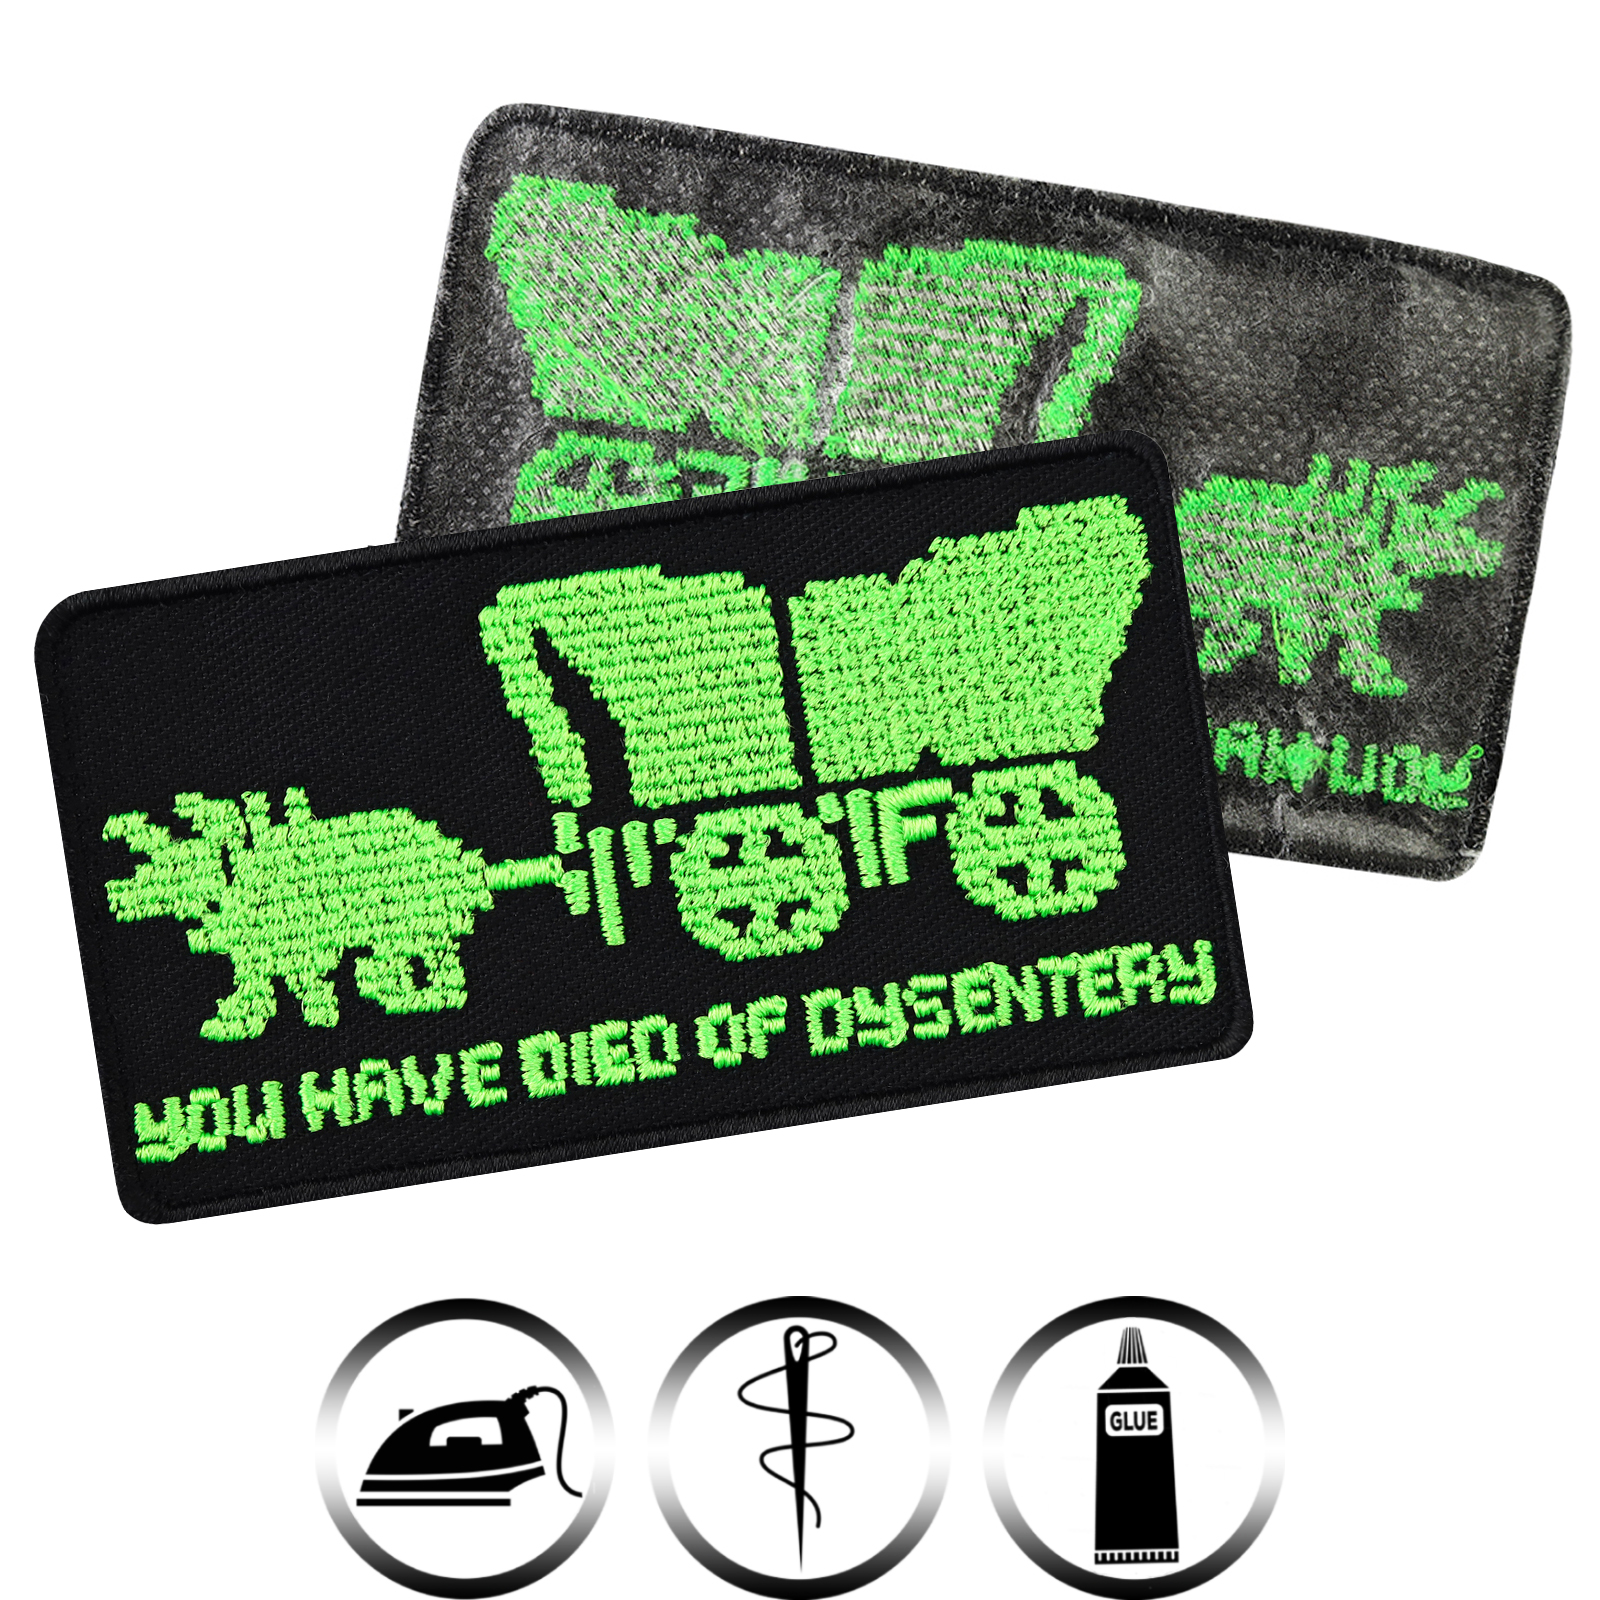 You have died of dysentery - Patch